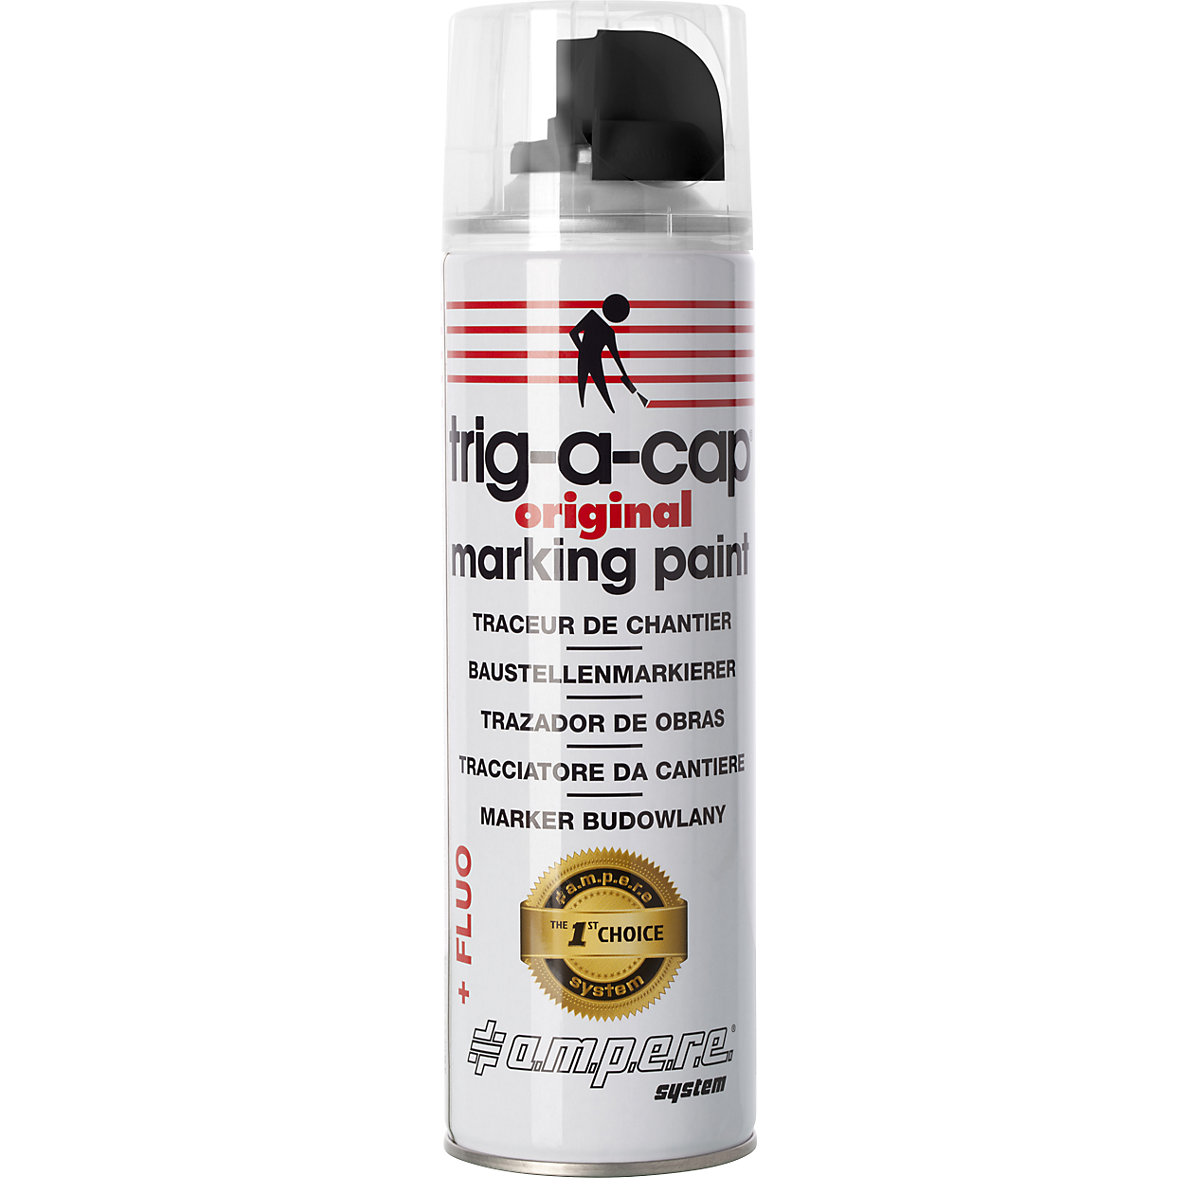 Construction site marking spray – Ampere, content 500 ml, solvent-based, pack of 12 cans, black-7